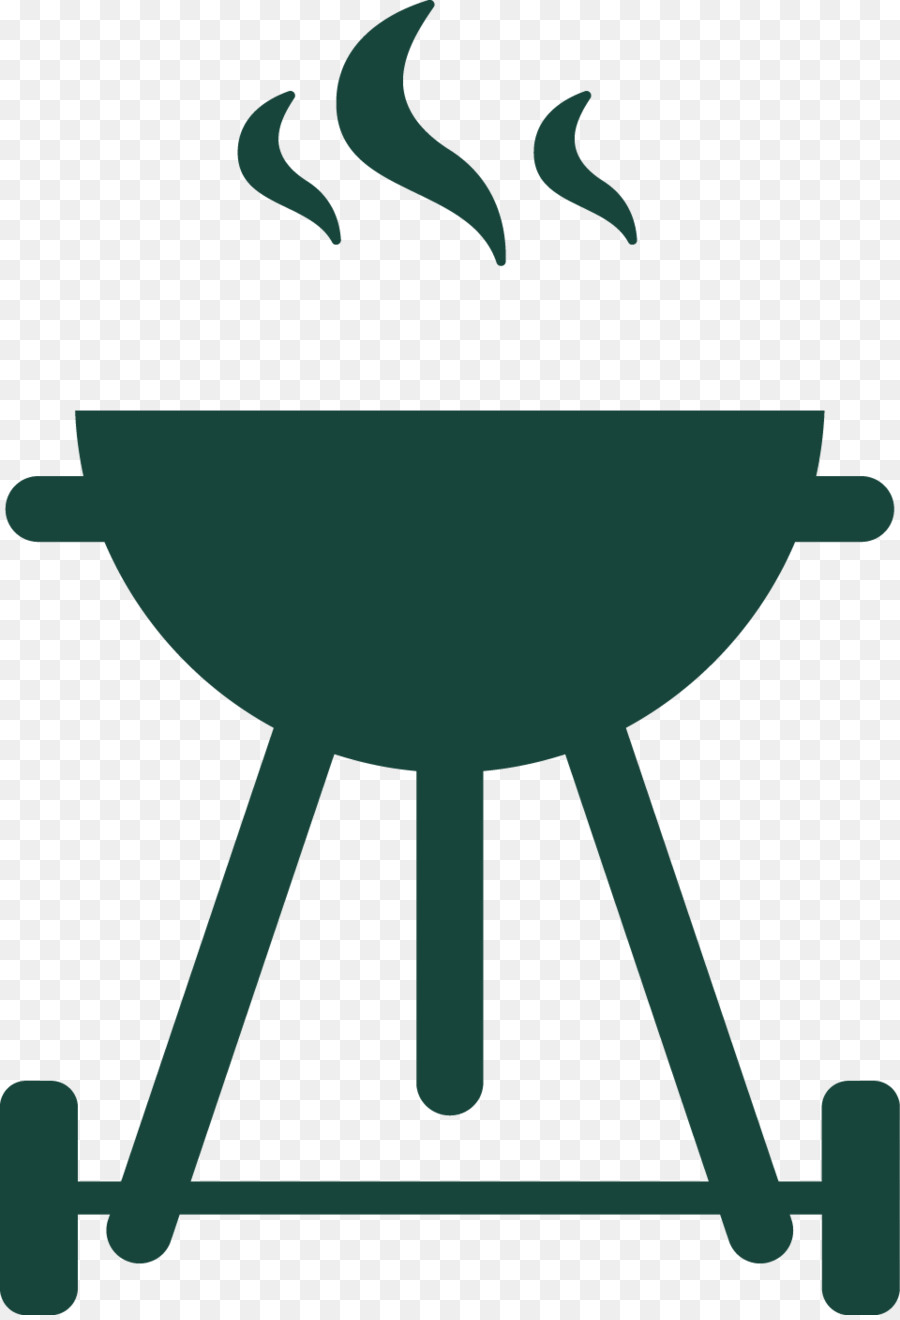 Barbecue Grilling BBQ Smoker Clip art Smoking - barbecue png download - 960*1403 - Free Transparent Barbecue png Download.